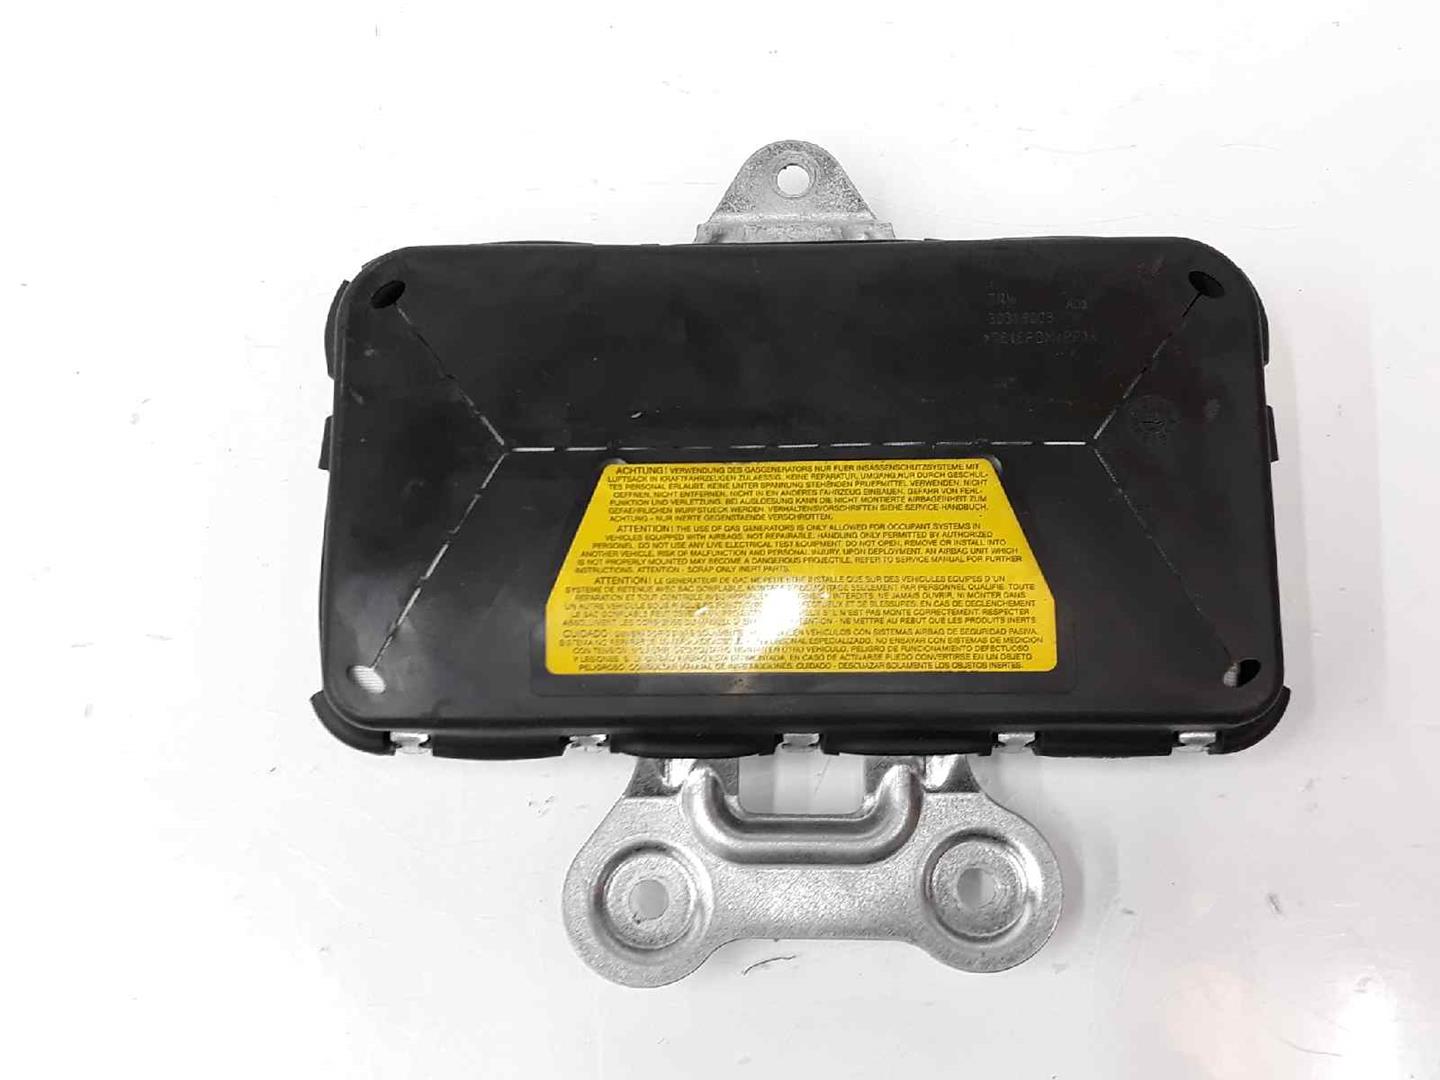 LAND ROVER Range Rover 3 generation (2002-2012) Front Right Door Airbag SRS EHM000120, 30322456A 24143326